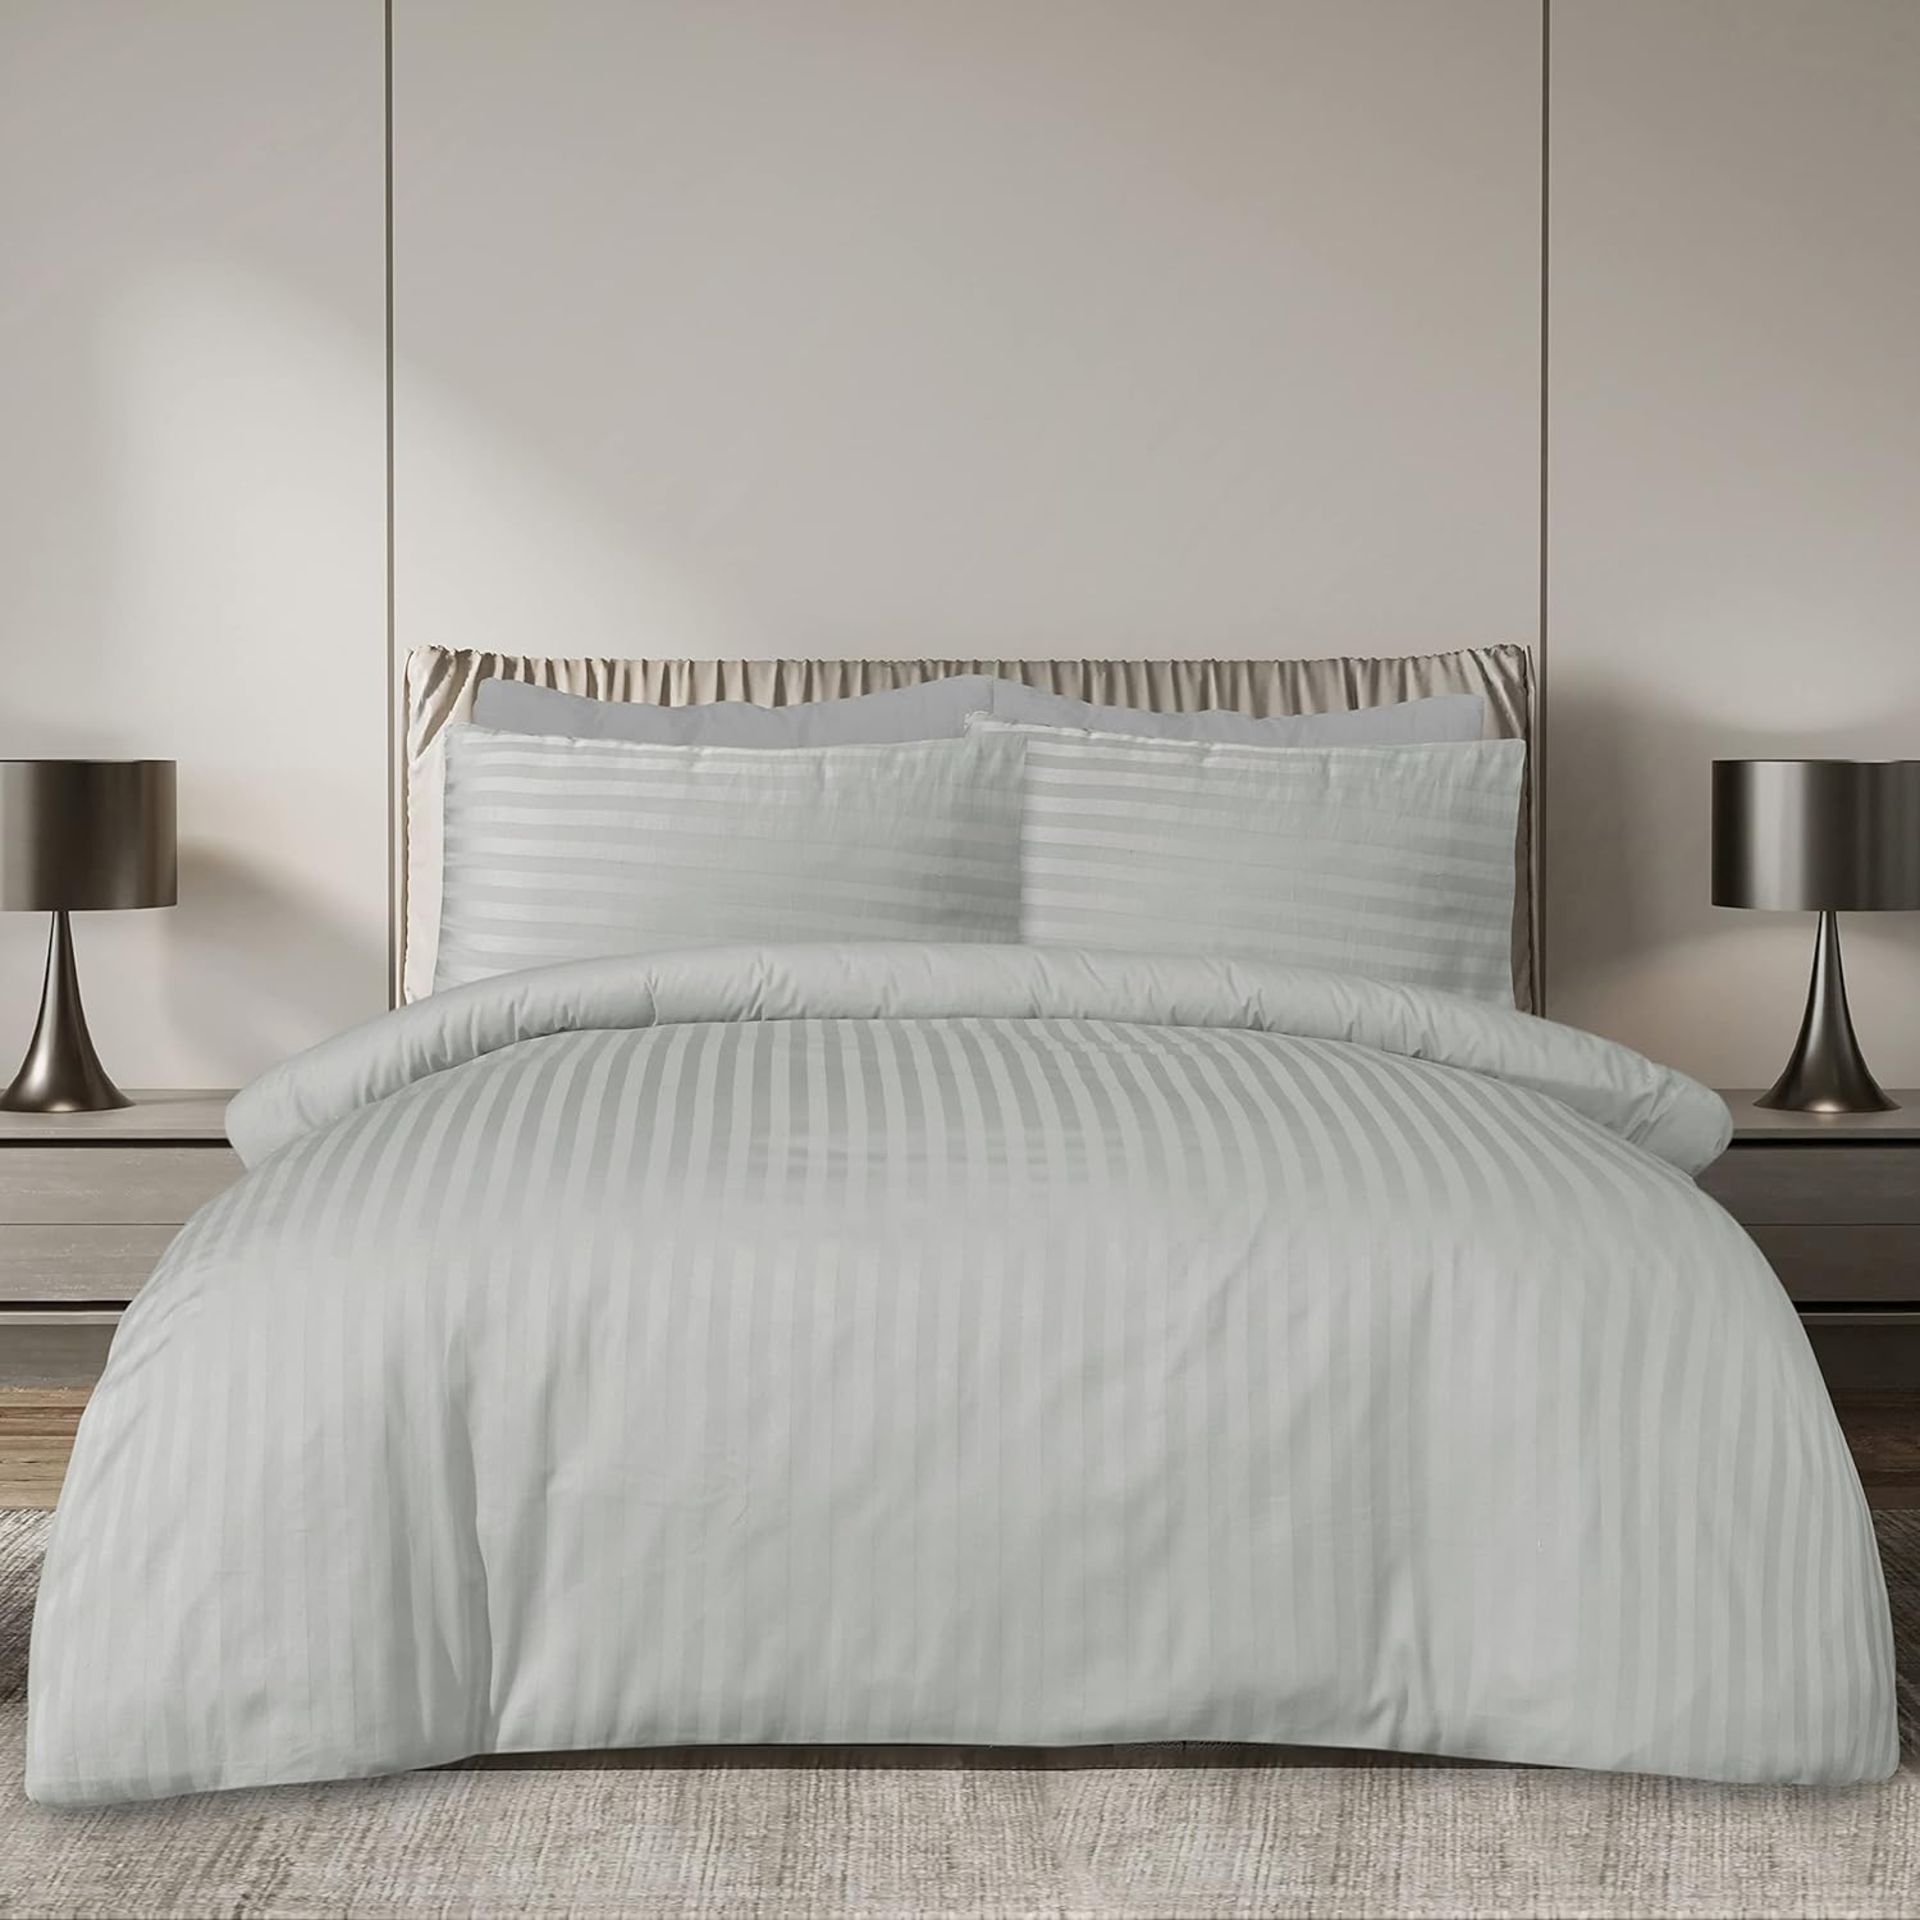 7x NEW & PACKAGED SLEEPDOWN Hotel Collection 225 Thread Count Satin Stripe DOUBLE Duvet Set -